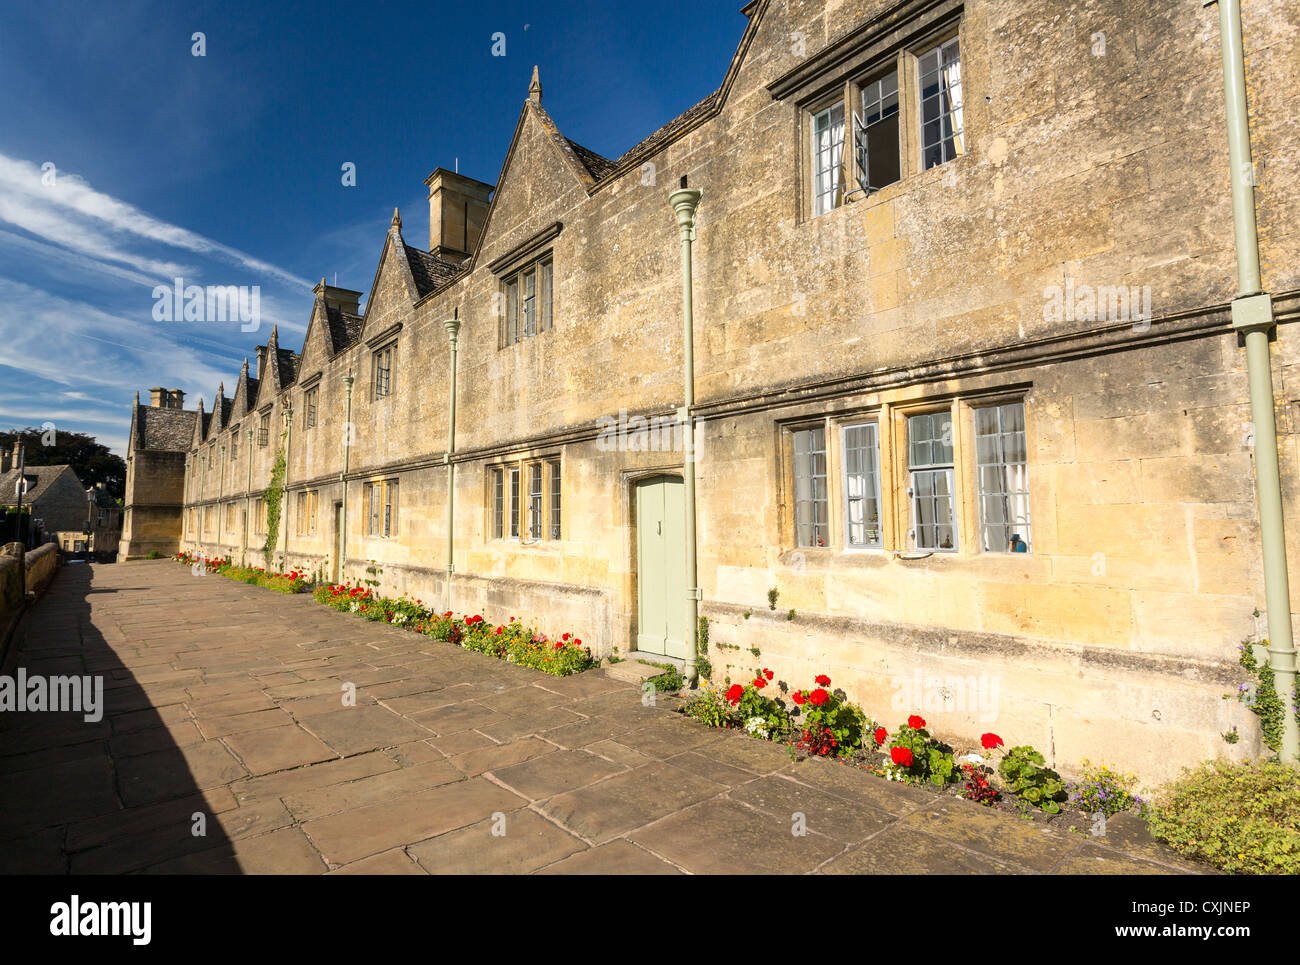 Cotswold stone almshouses in Chipping Campden in Cotswolds England Stock Photo